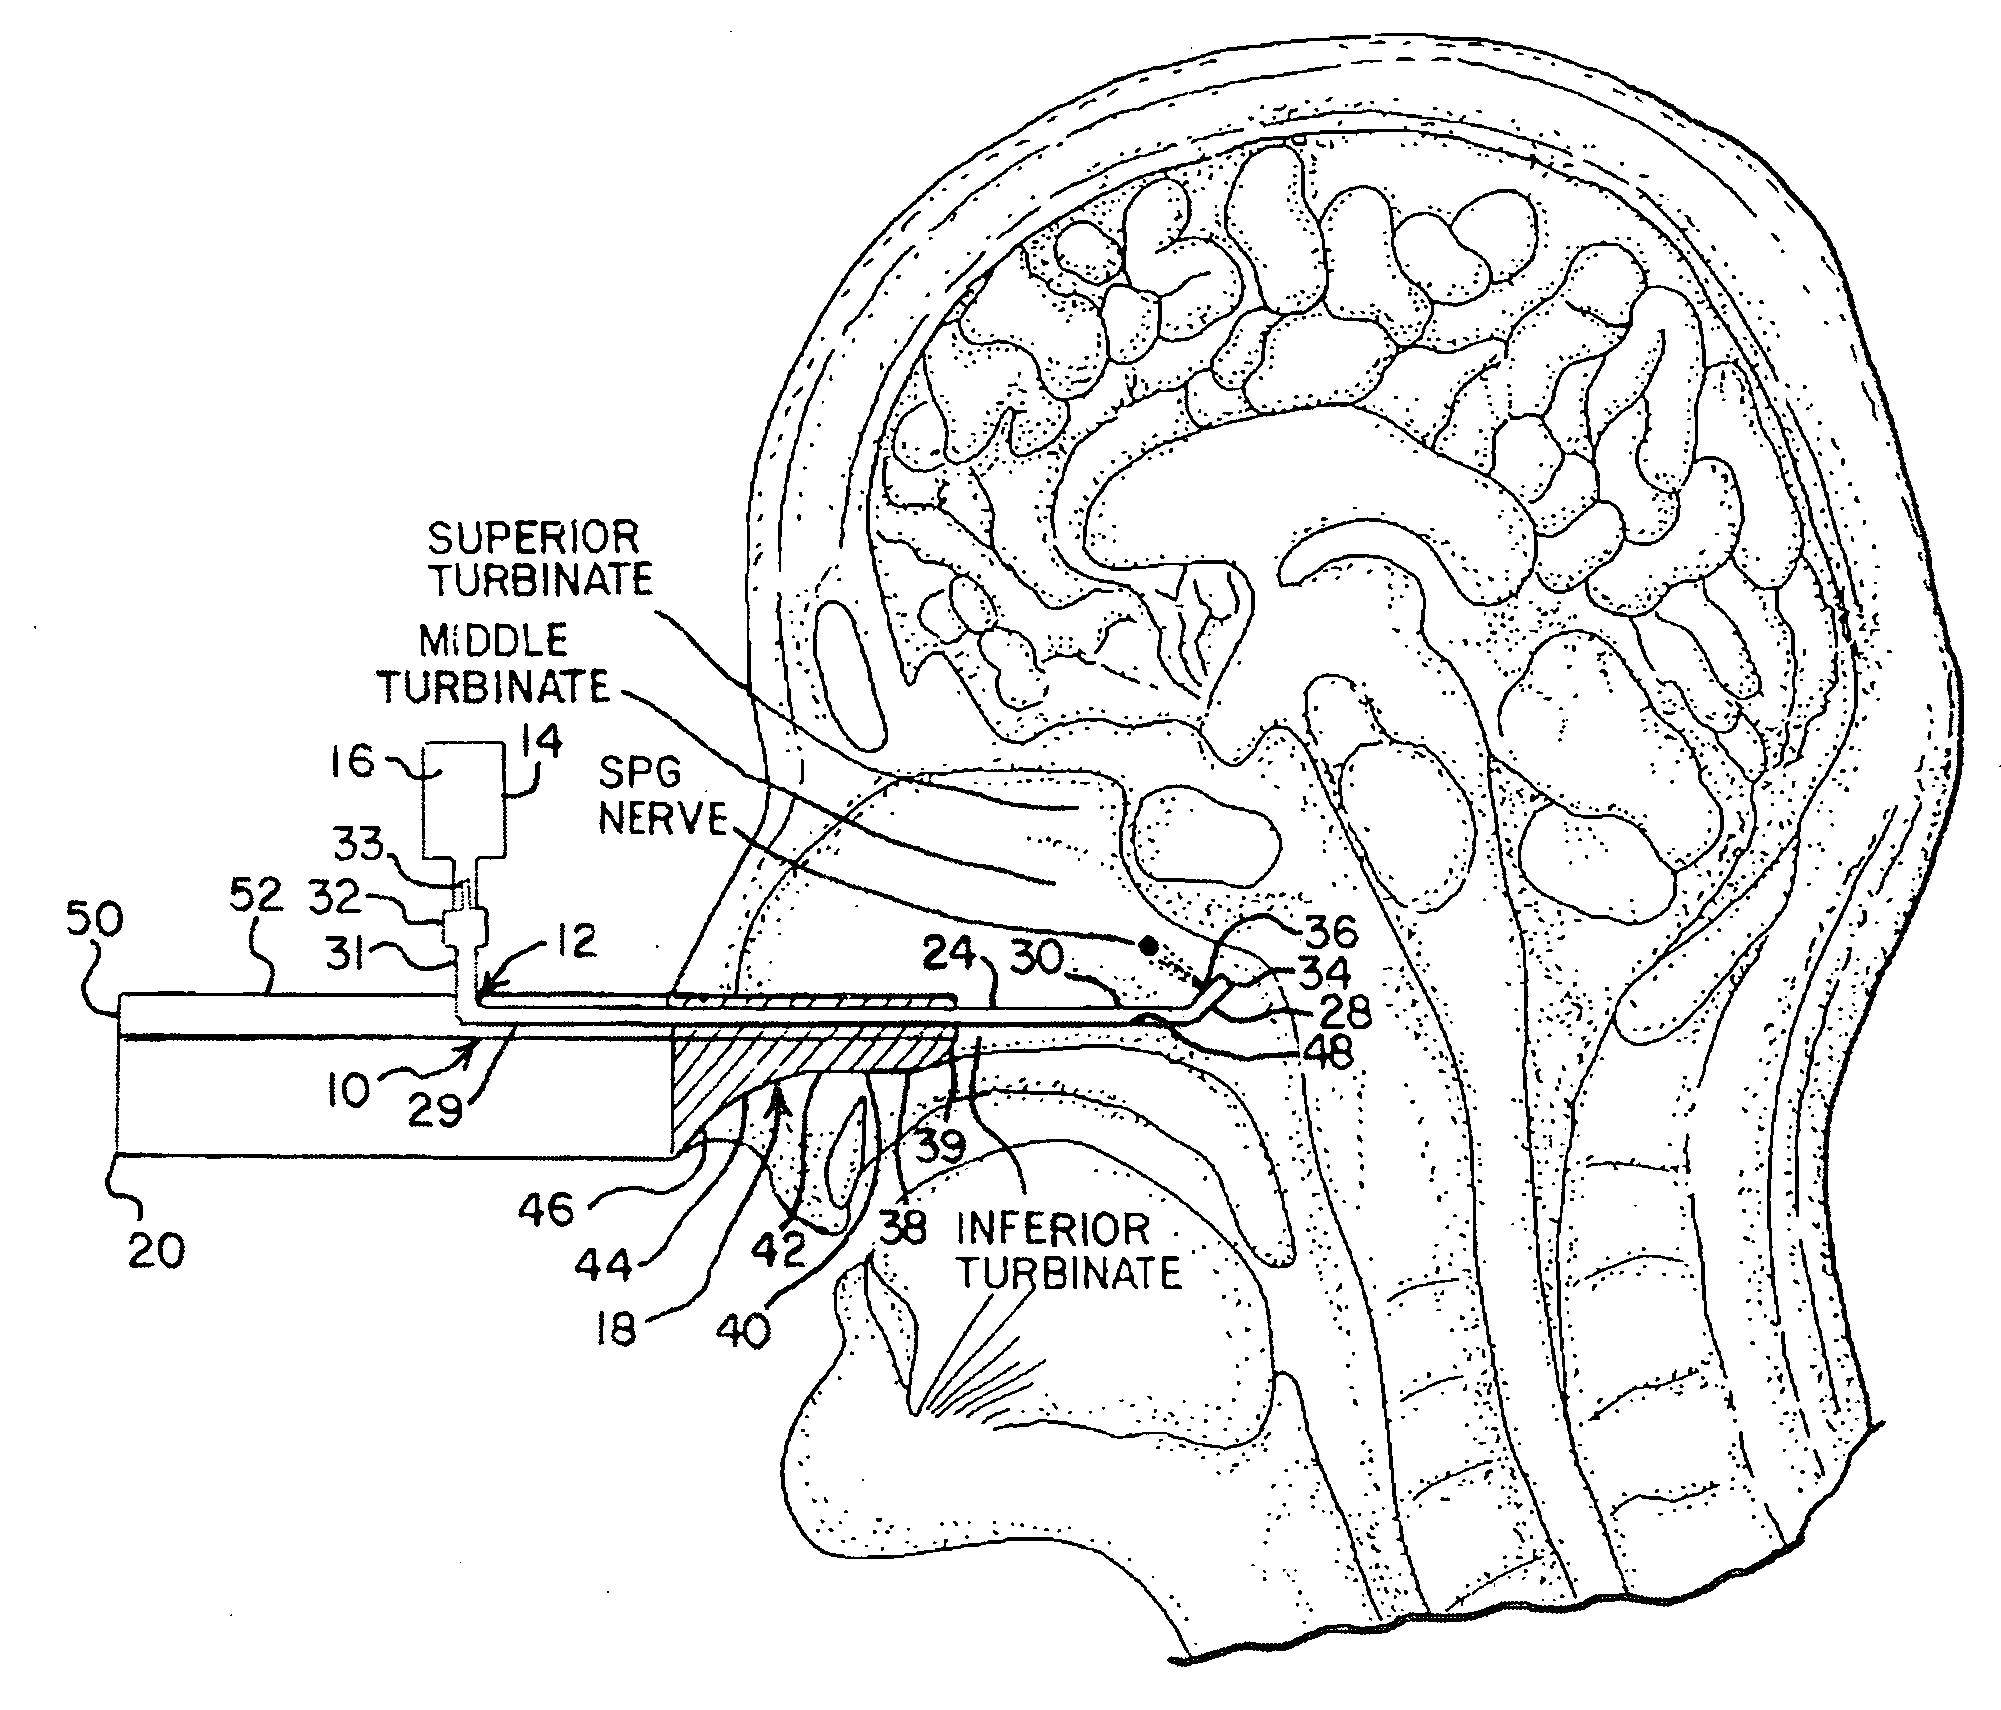 Apparatus and Method for Controlling Headaches